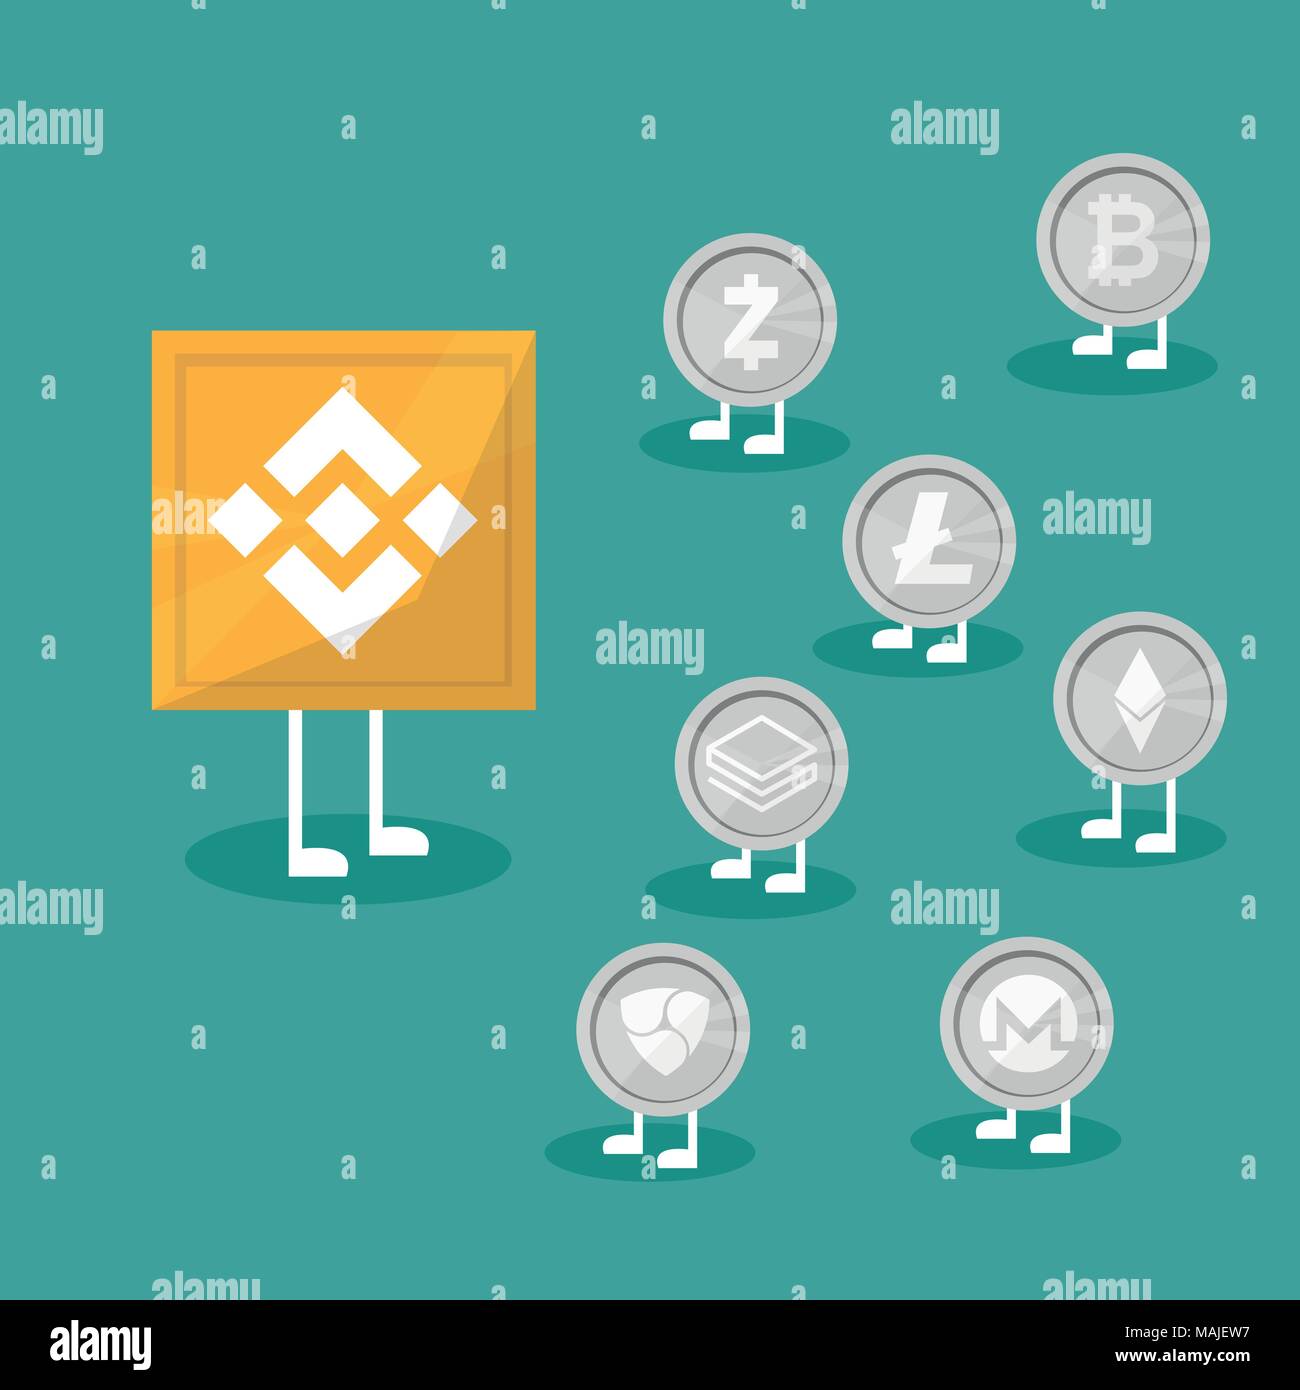 Kucoin High Resolution Stock Photography and Images - Alamy